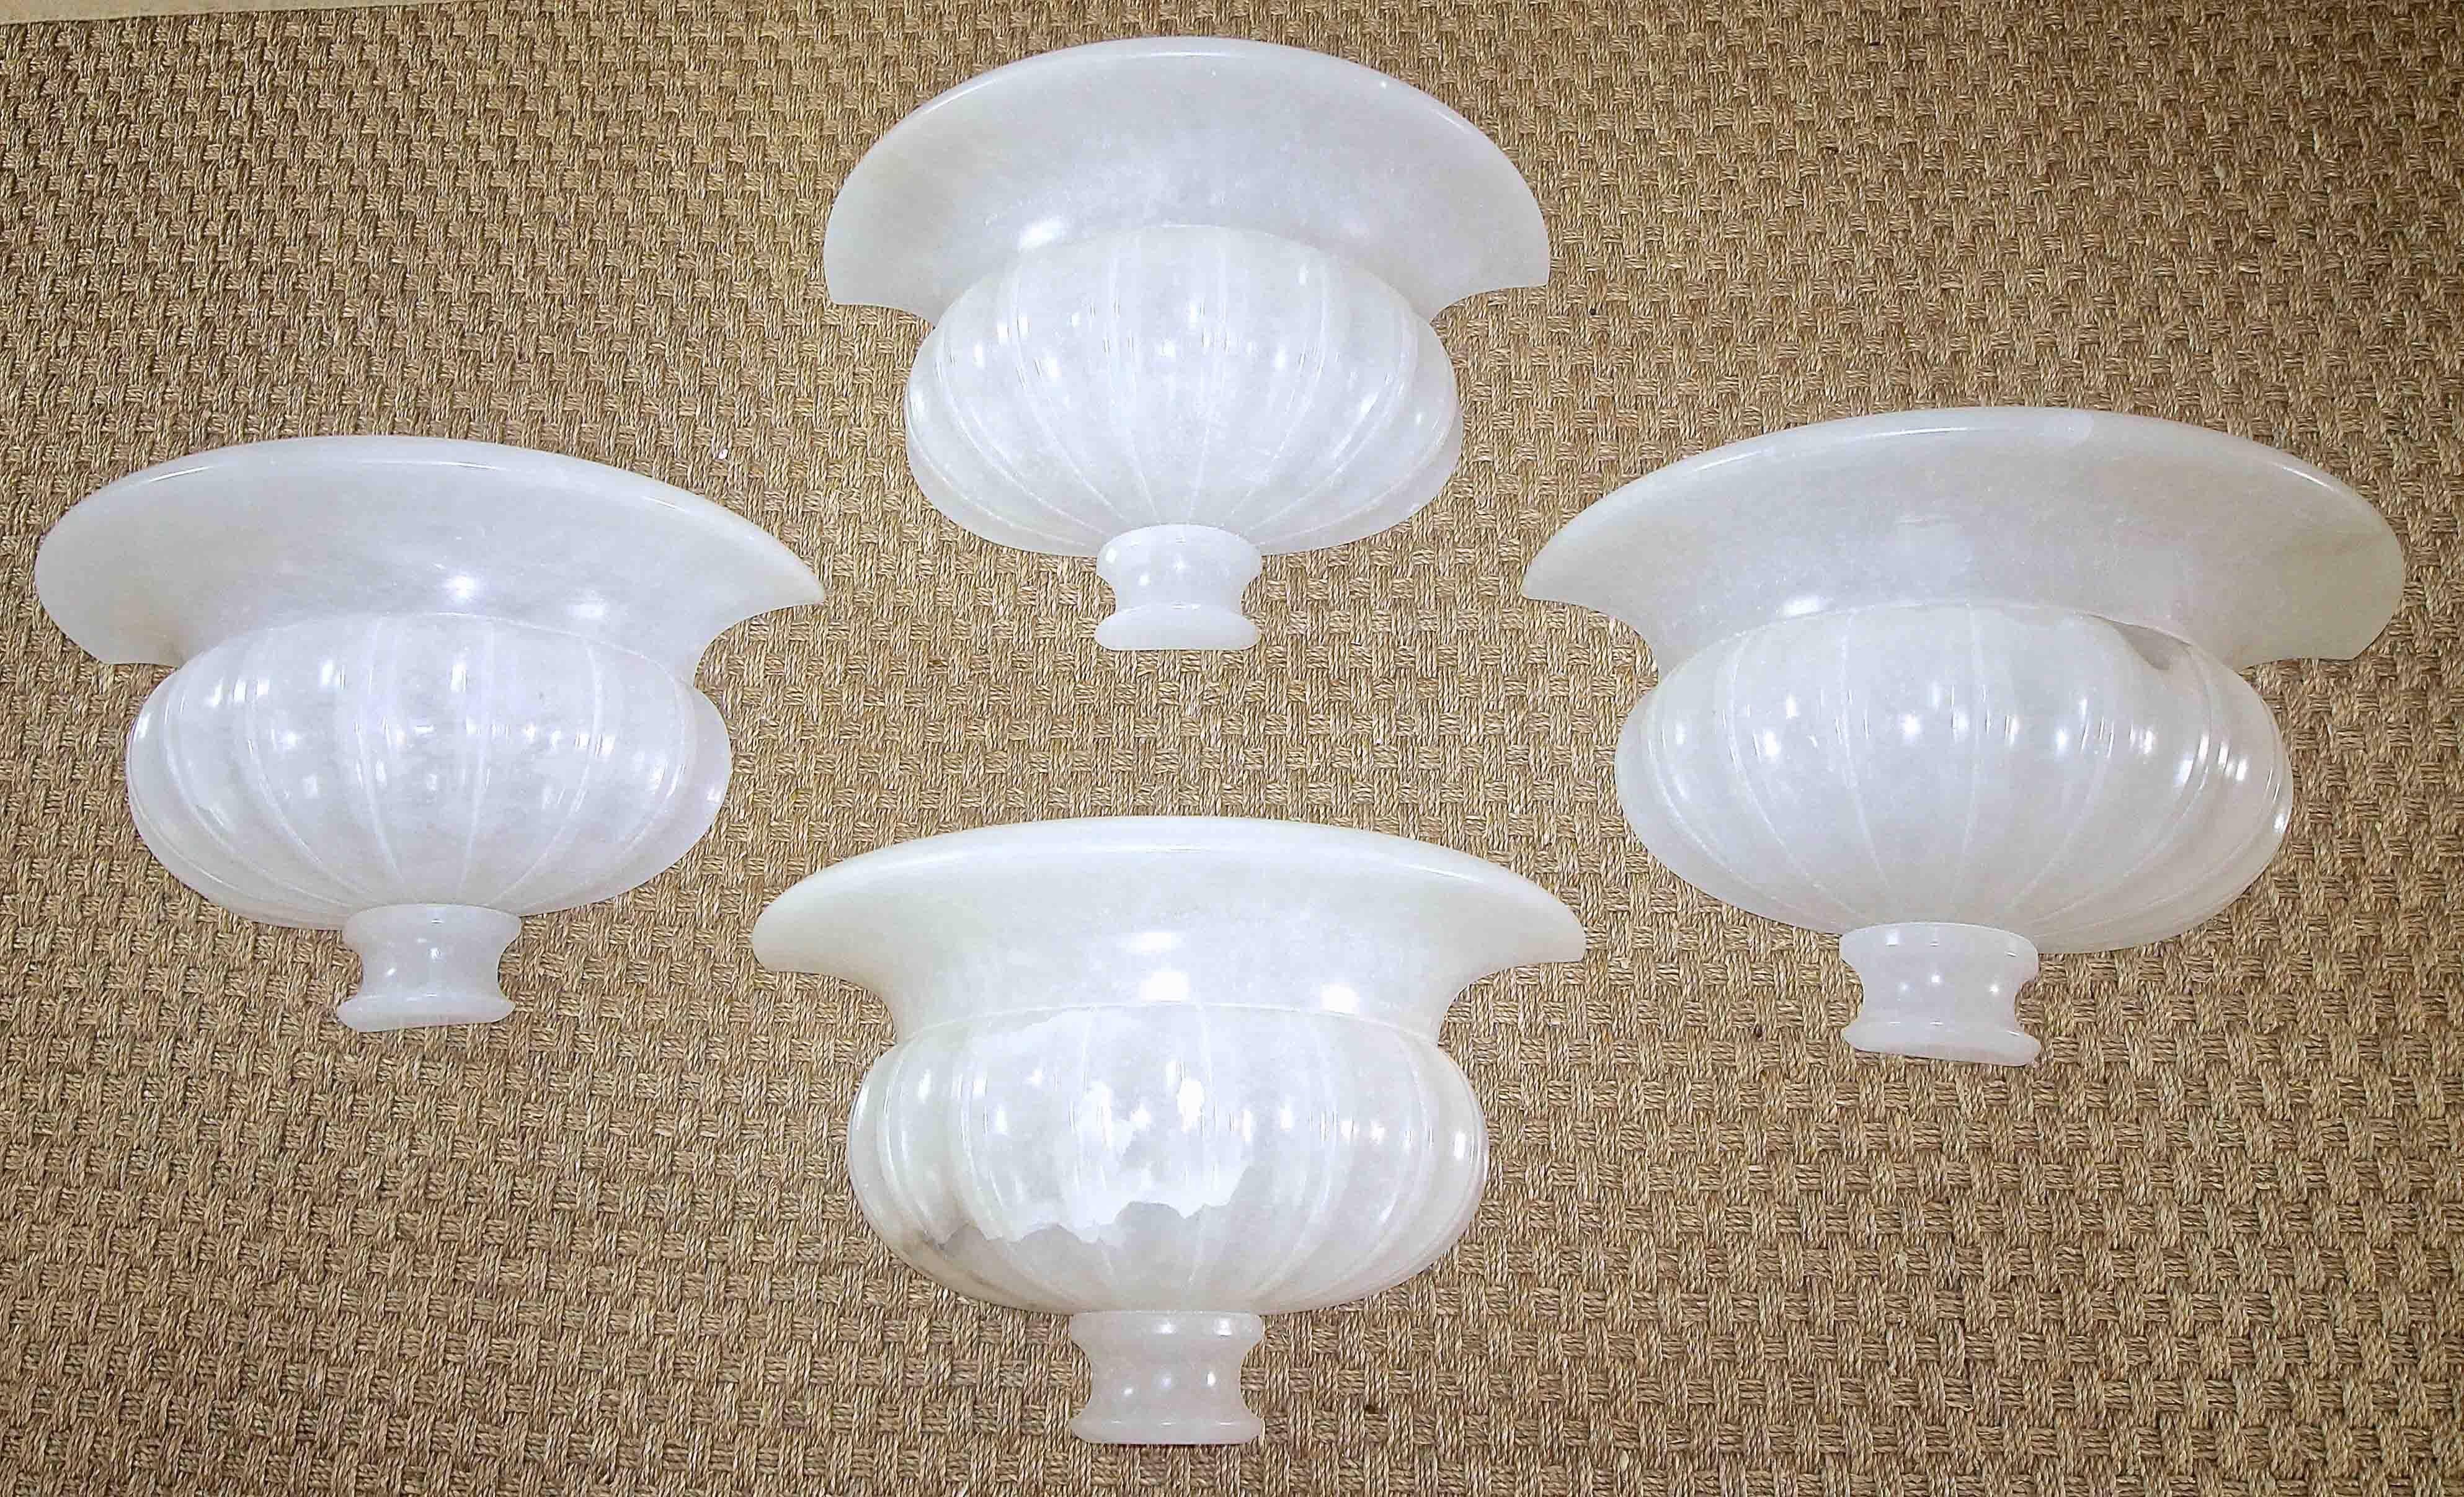 Set of four (4) large alabaster wall sconces in a neoclassic urn form. Hand carved in Italy. Newly wired for US. 

Priced by the pair. Available for purchase by the pair or the complete set of four sconces (two pairs).

19.75